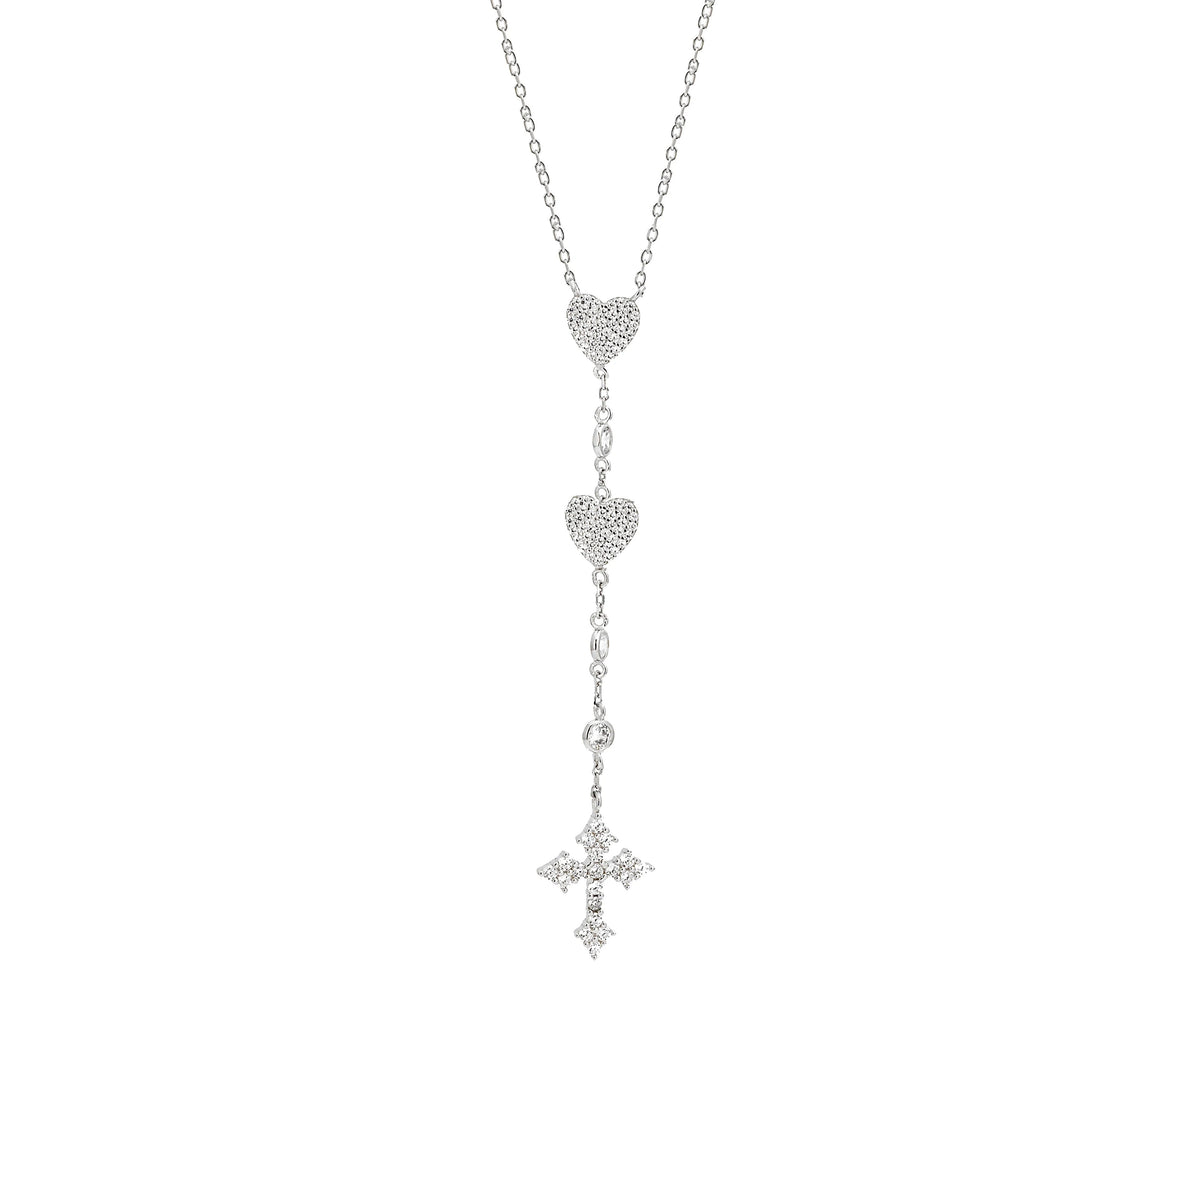 cross necklaces sterling silver .925 waterproof, rosary necklace, lariat, y dainty necklace with hearts, designer luxury unique necklaces, bridal gifts, jewelry for brides, bridesmaids necklaces, religious gift ideas. Unique influencer necklaces, bathing suit jewelry, valentines and mothers day gift ideas, trending on instagram and tiktok, unique jewelry unisex necklaces Kesley Boutique, unique jewelry 